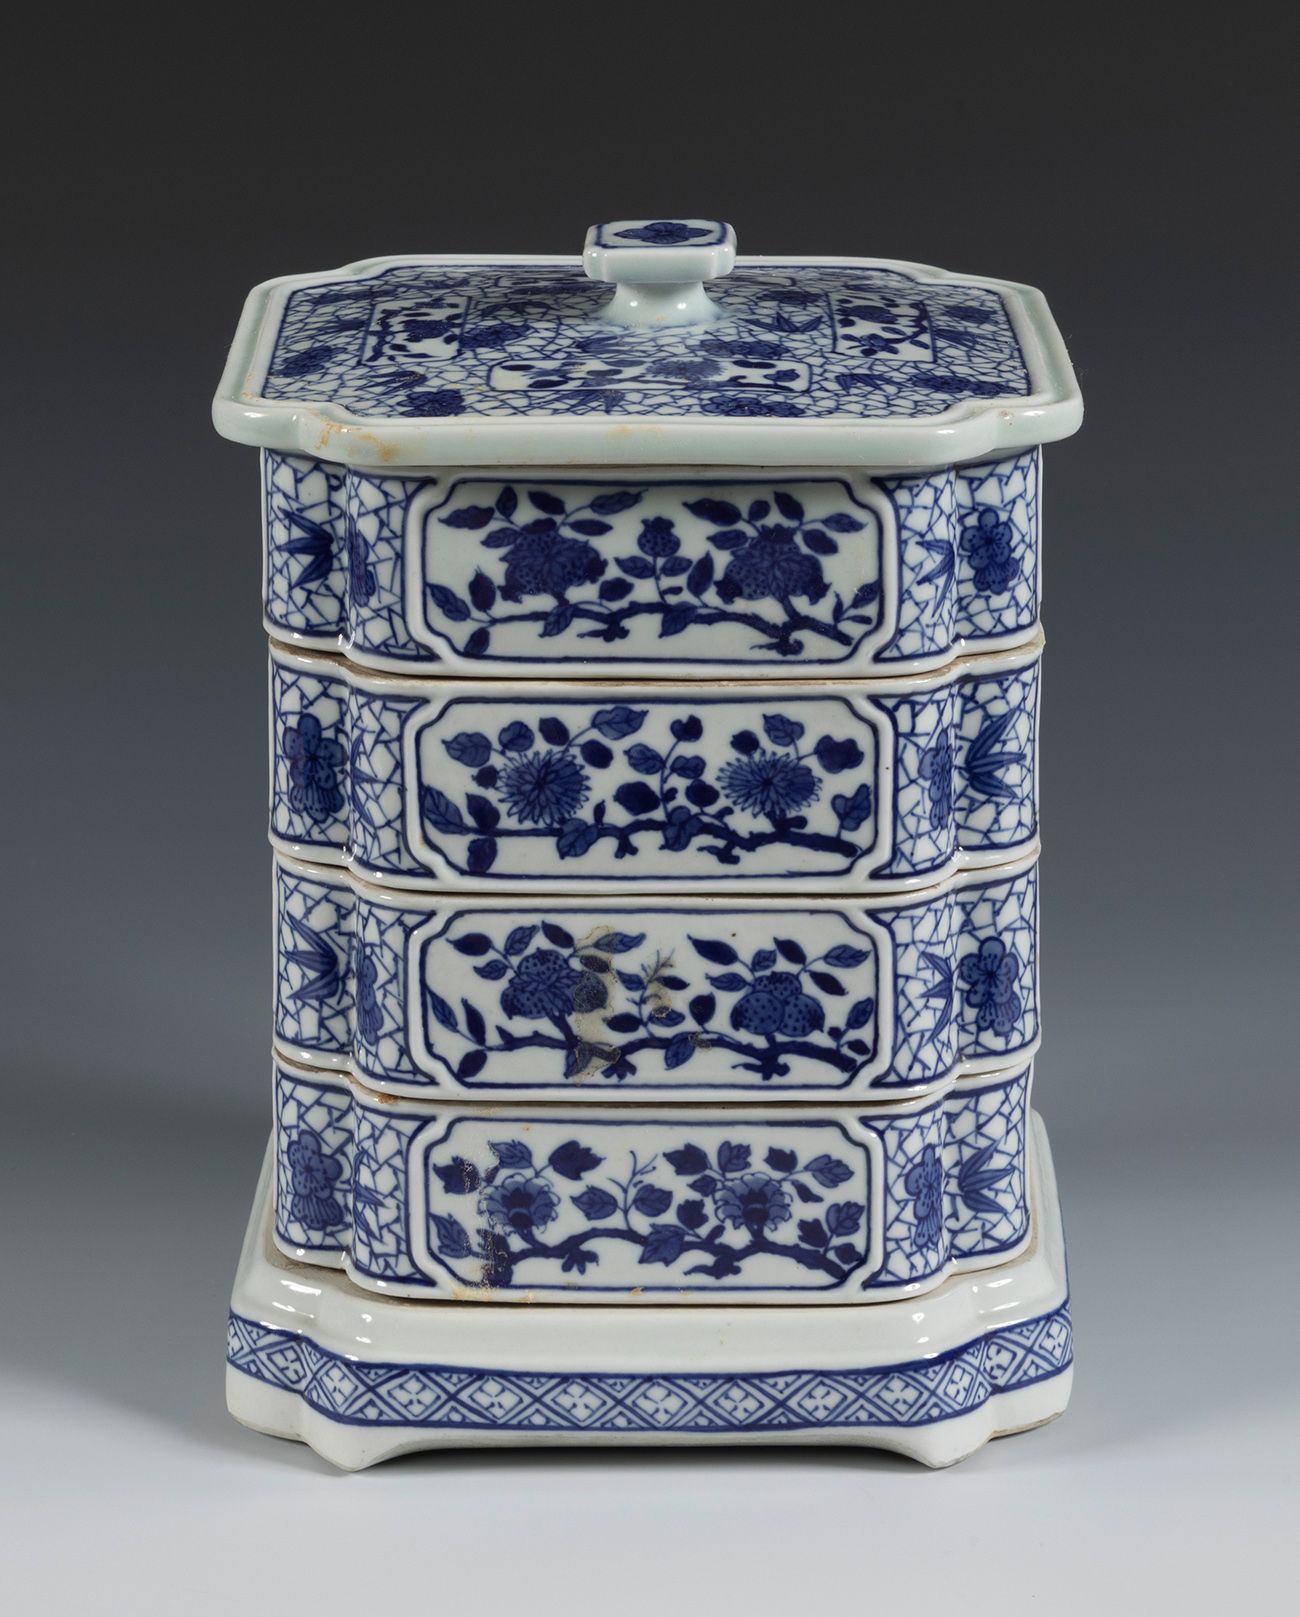 Null Basket. China, Dao Guang period, 1821-1850.
Porcelain
Seal on the base.
In &hellip;